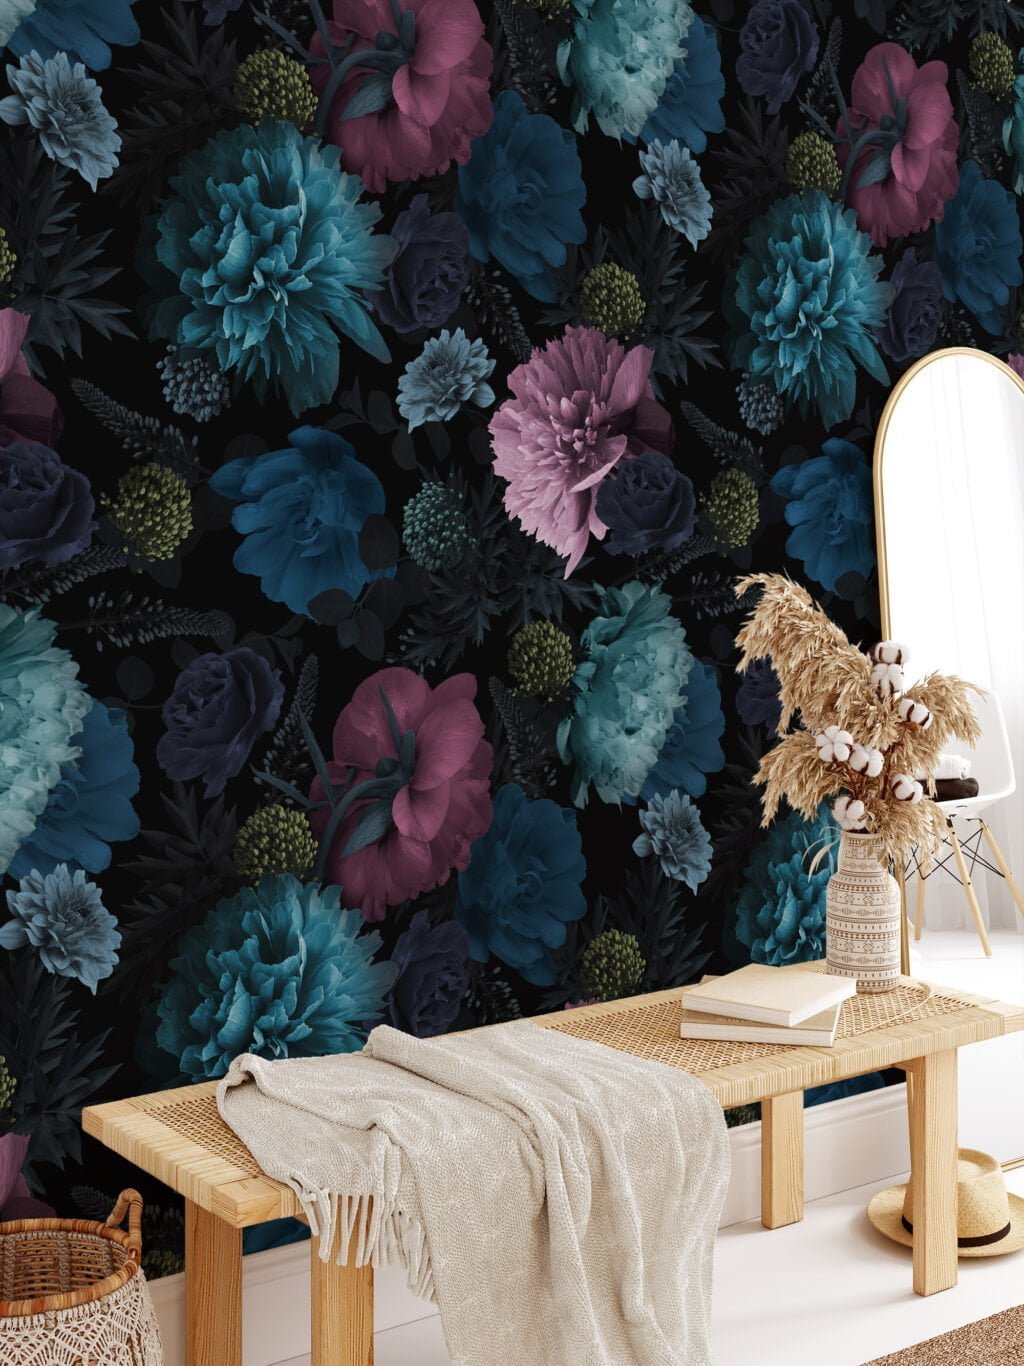 Turquoise and Pink Floral Peel and Stick Wallpaper, Self Adhesive Removable Wall Mural for Living Room, Bedroom, or Bathroom